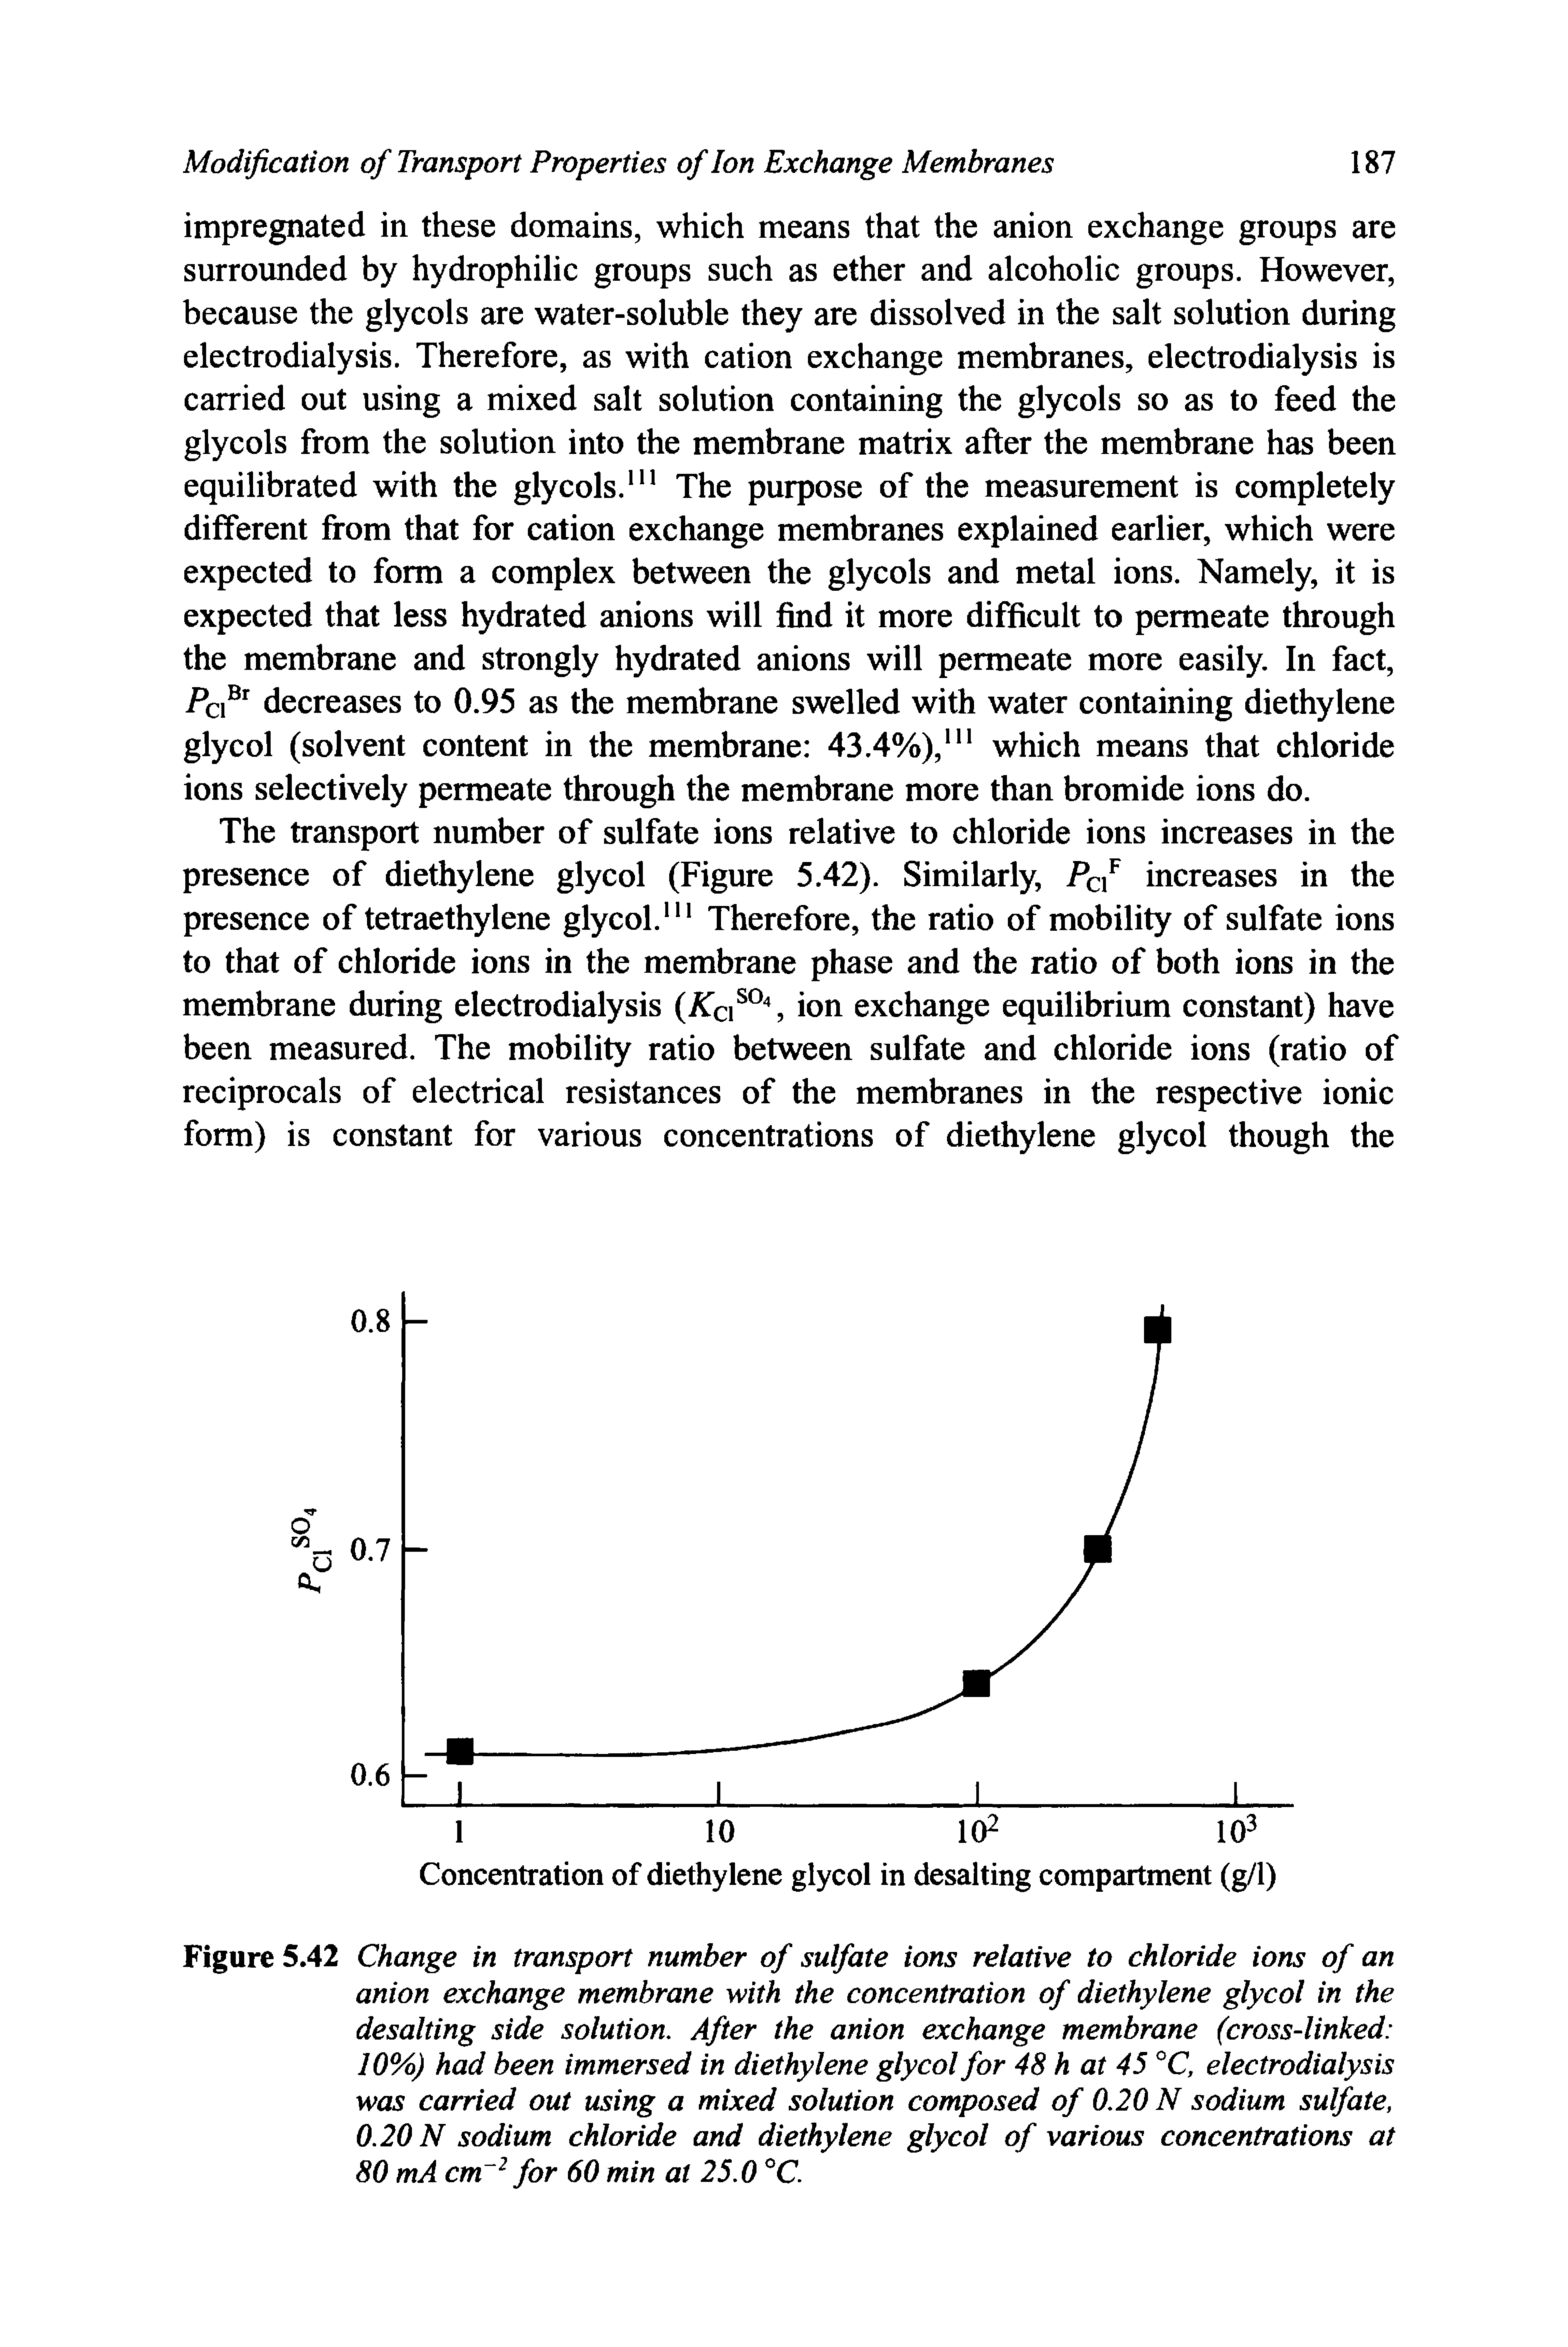 Figure 5.42 Change in transport number of sulfate ions relative to chloride ions of an anion exchange membrane with the concentration of diethylene glycol in the desalting side solution. After the anion exchange membrane (cross-linked 10%) had been immersed in diethylene glycol for 48 h at 45 °C, electrodialysis was carried out using a mixed solution composed of 0.20 N sodium sulfate, 0.20 N sodium chloride and diethylene glycol of various concentrations at 80 mA cm 2 for 60 min at 25.0 °C.